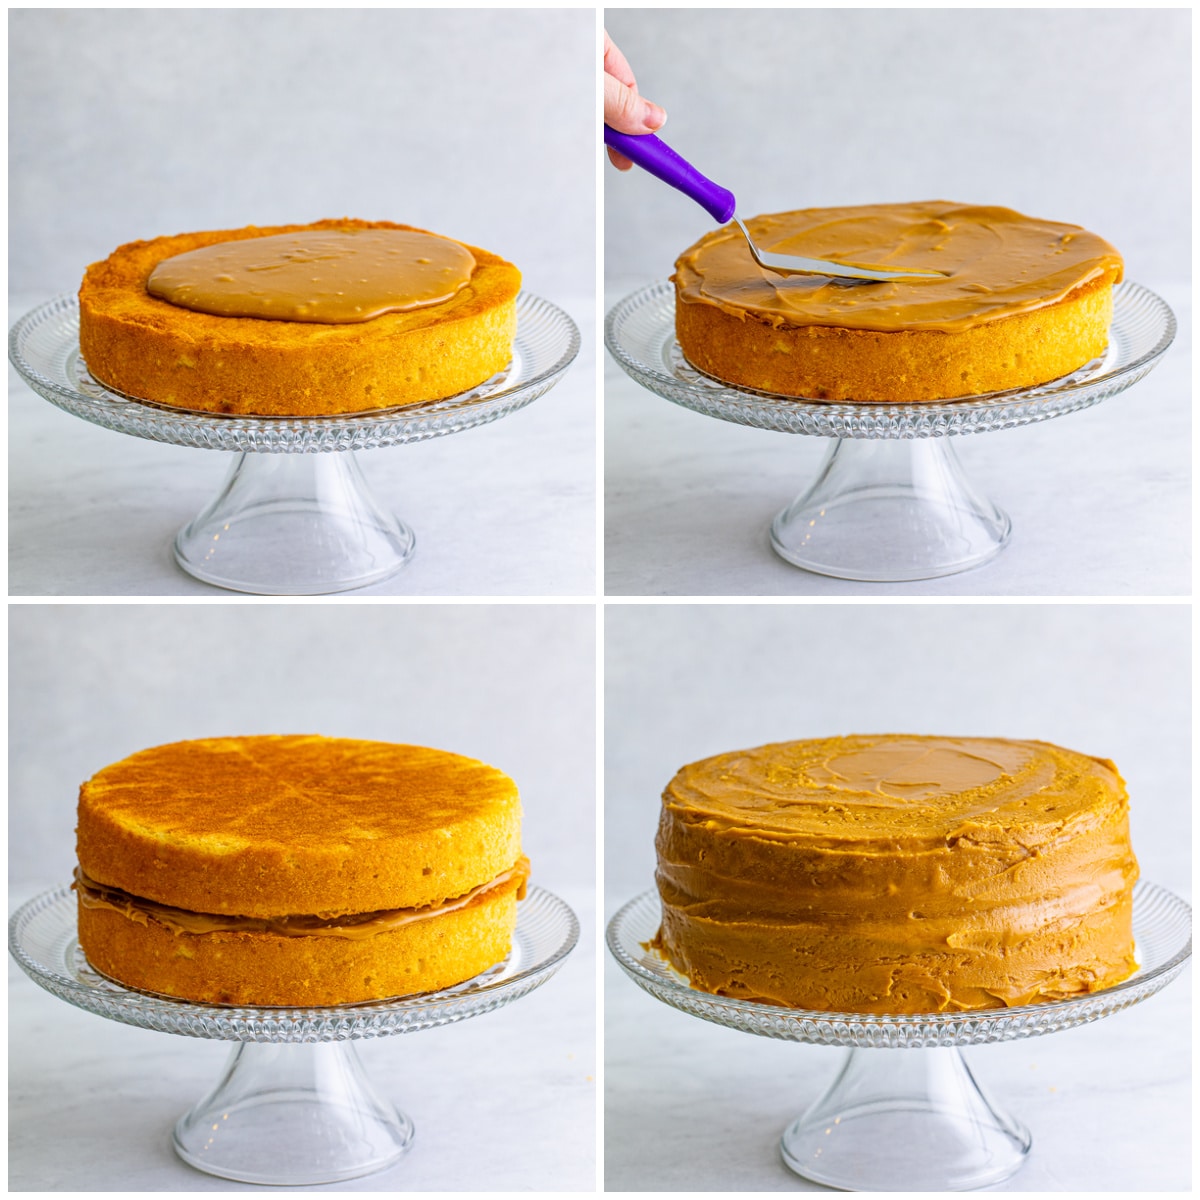 Step by step photos on how to assemble a Homemade Caramel Cake.